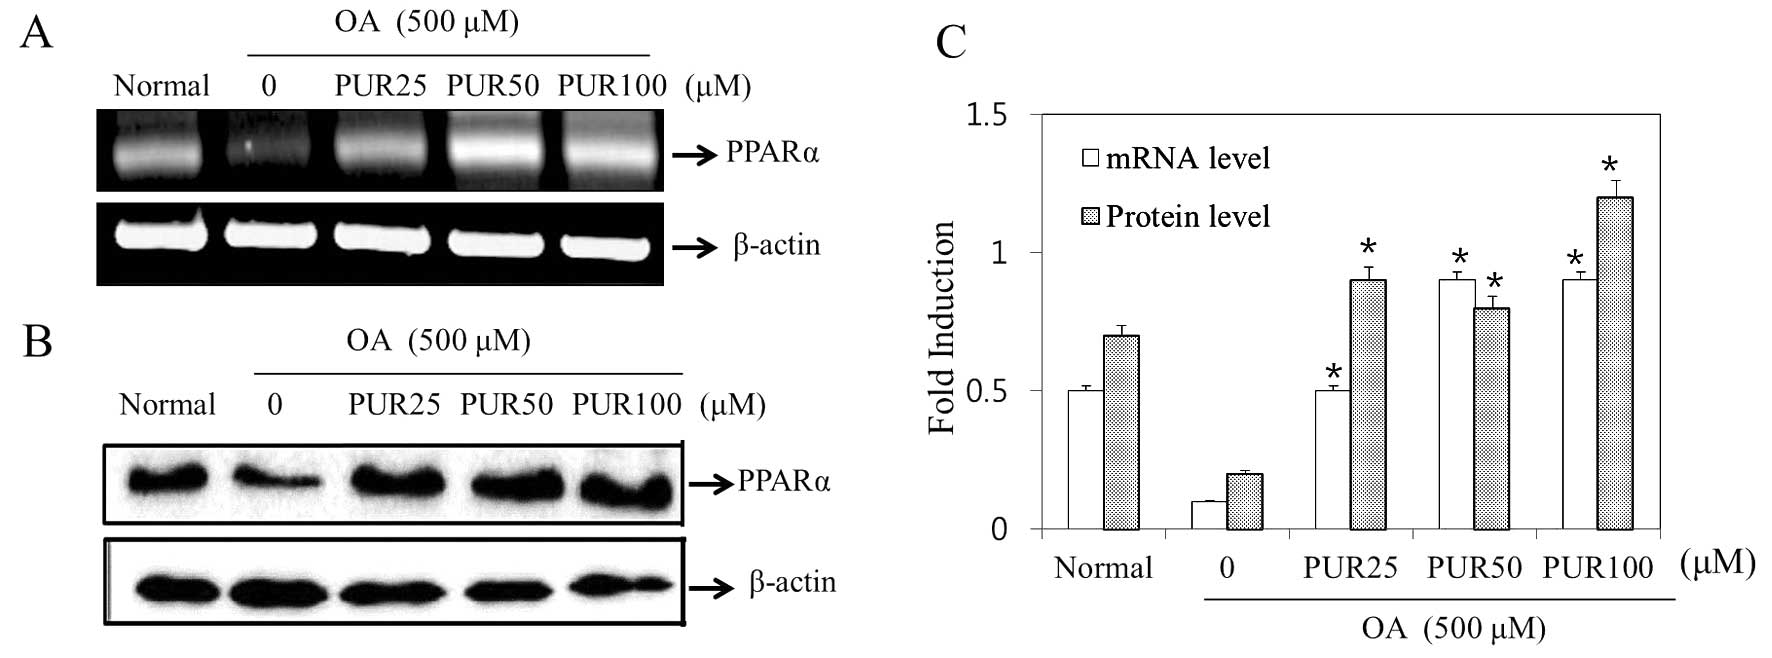 Puerarin Ameliorates Hepatic Steatosis By Activating The Ppara And Ampk Signaling Pathways In Hepatocytes